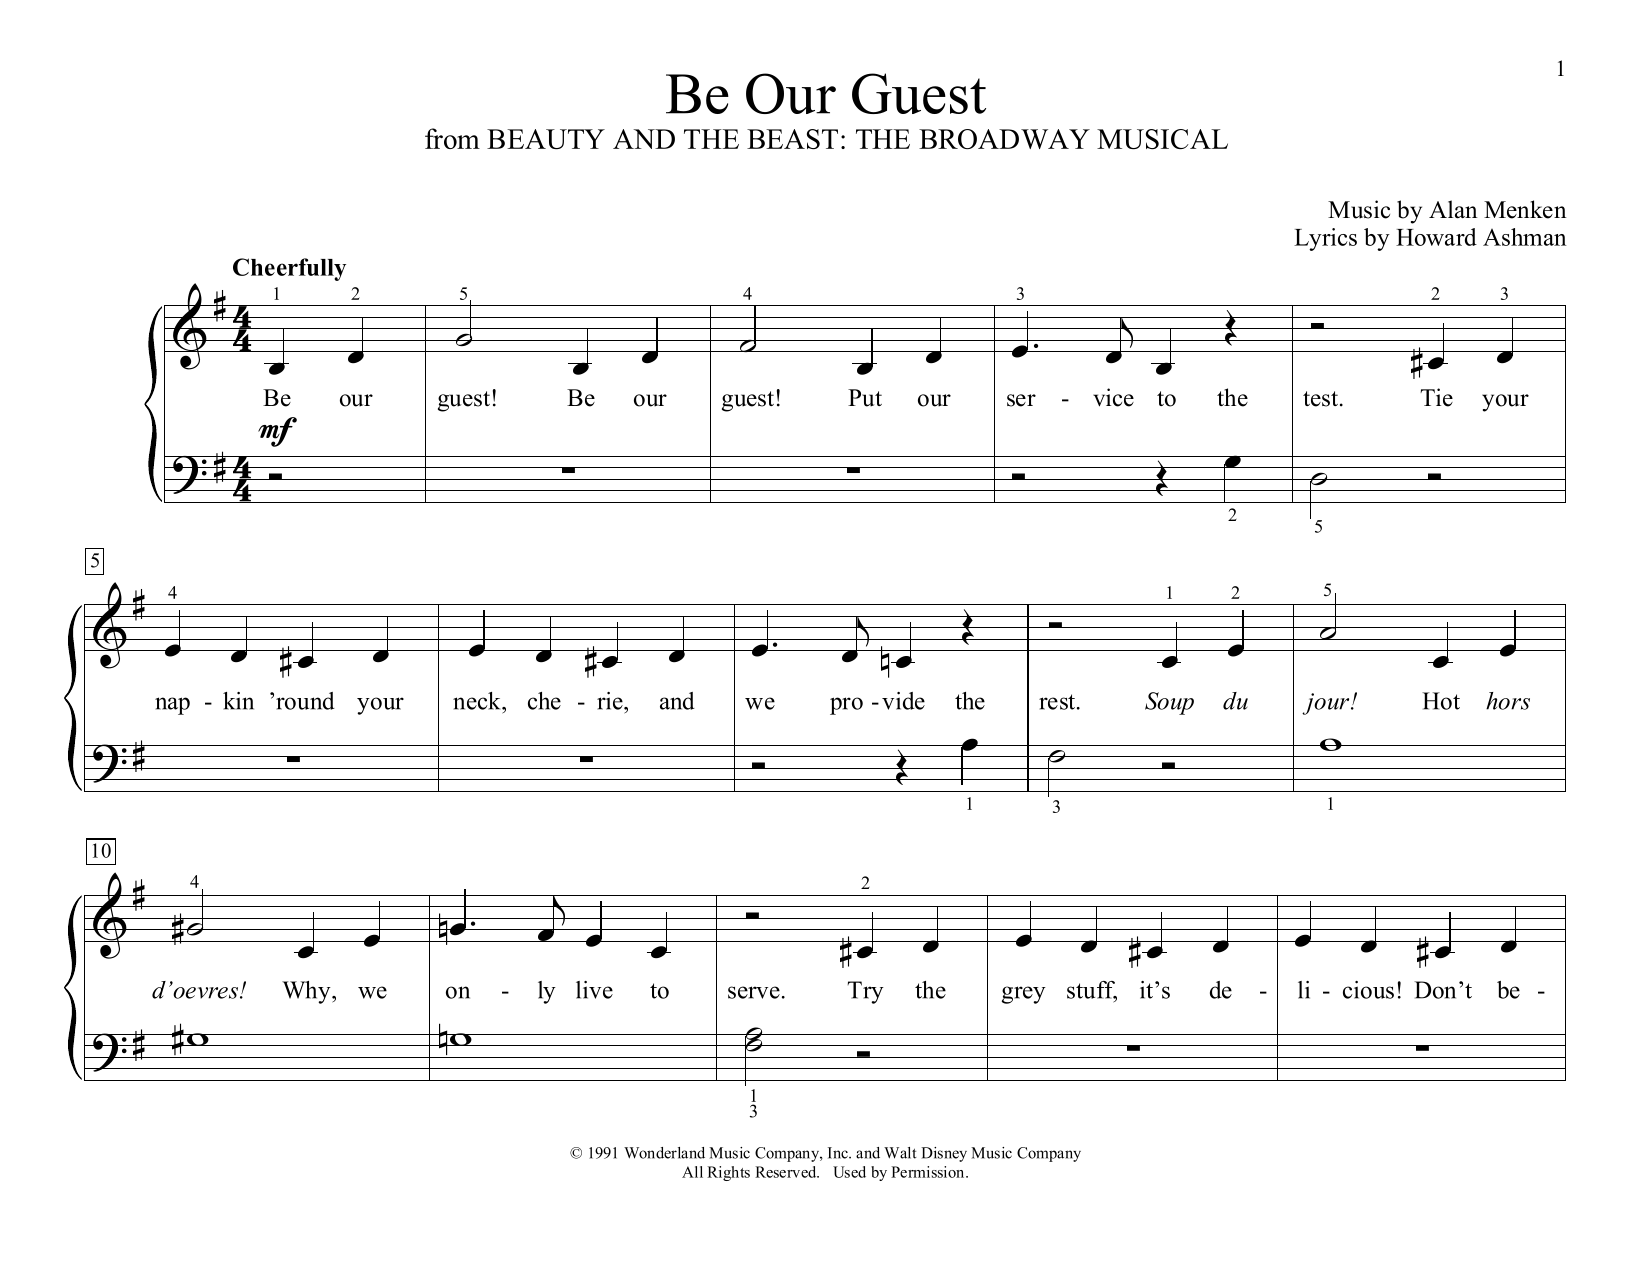 beauty-and-the-beast-lyrics-be-our-guest-the-song-be-our-guest-in